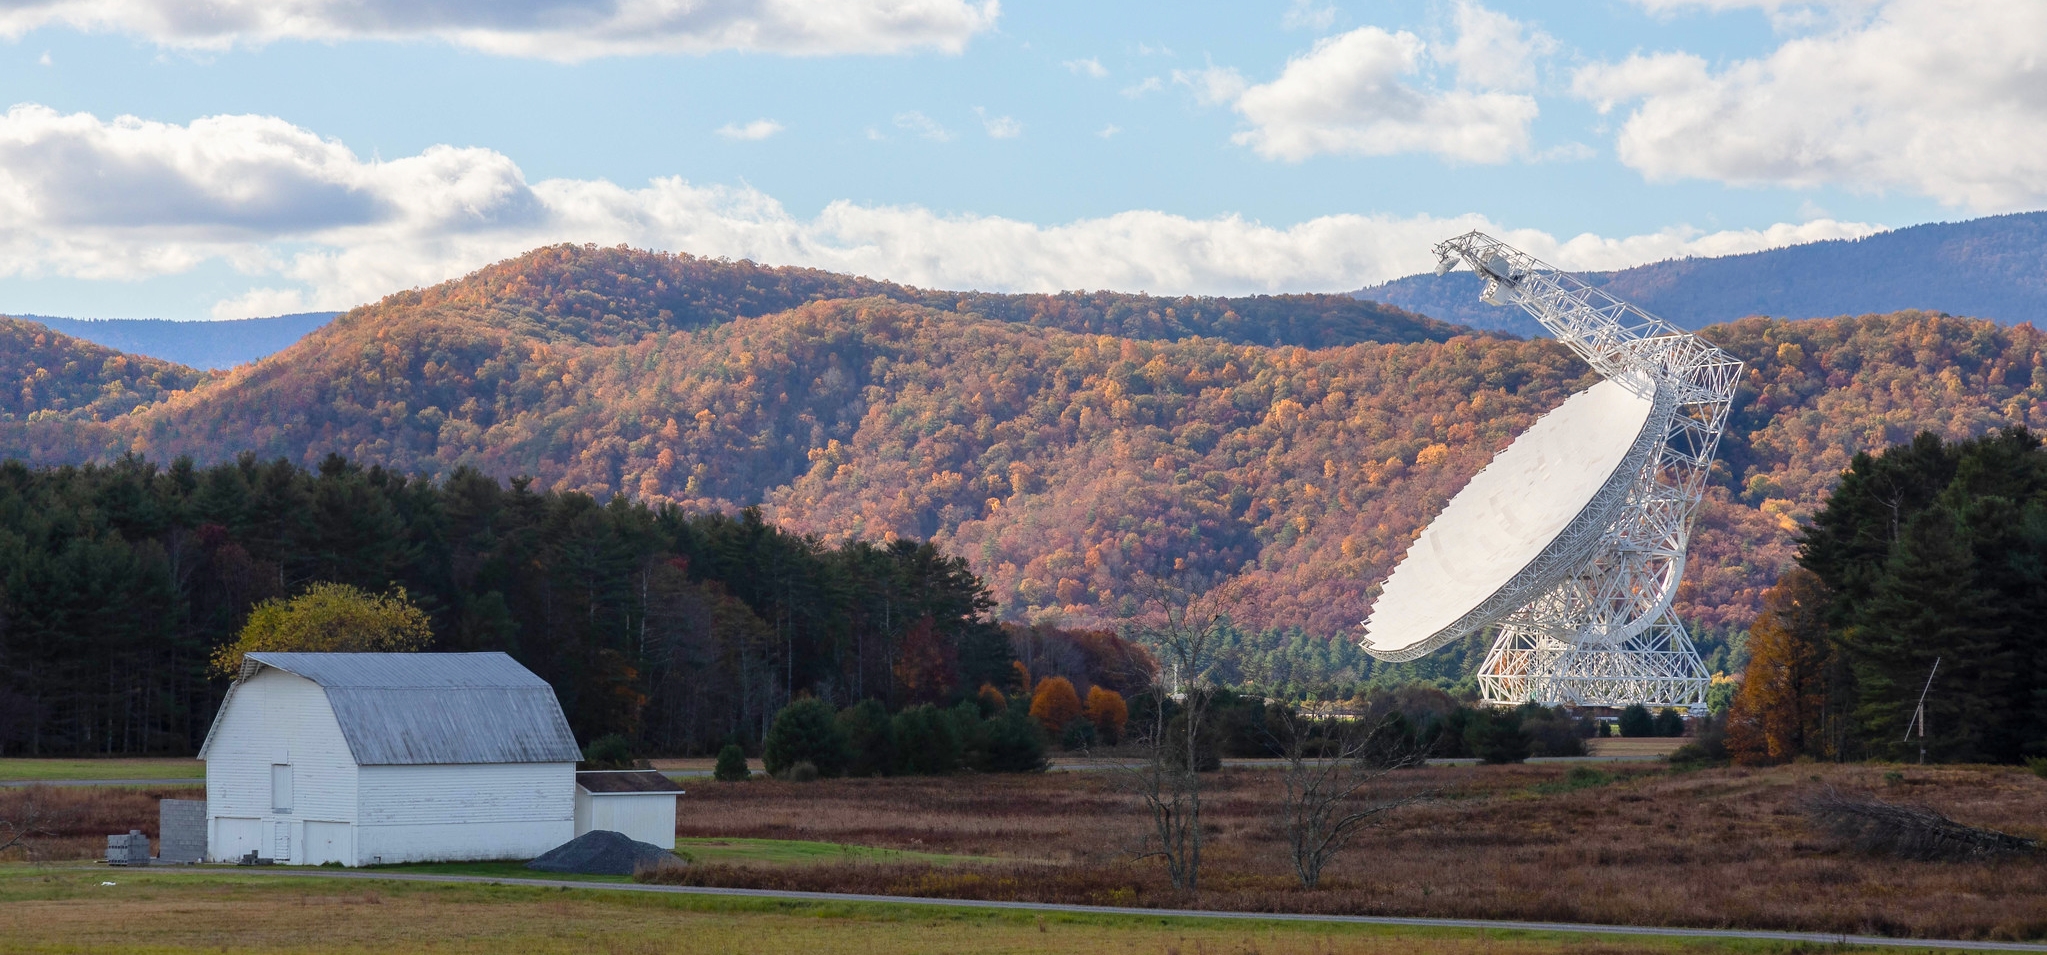 Green Bank Observatory in West Virginia, the newest APS Historic Site. Photo: David Brossard/Flickr. CC BY-SA 2.0 DEED